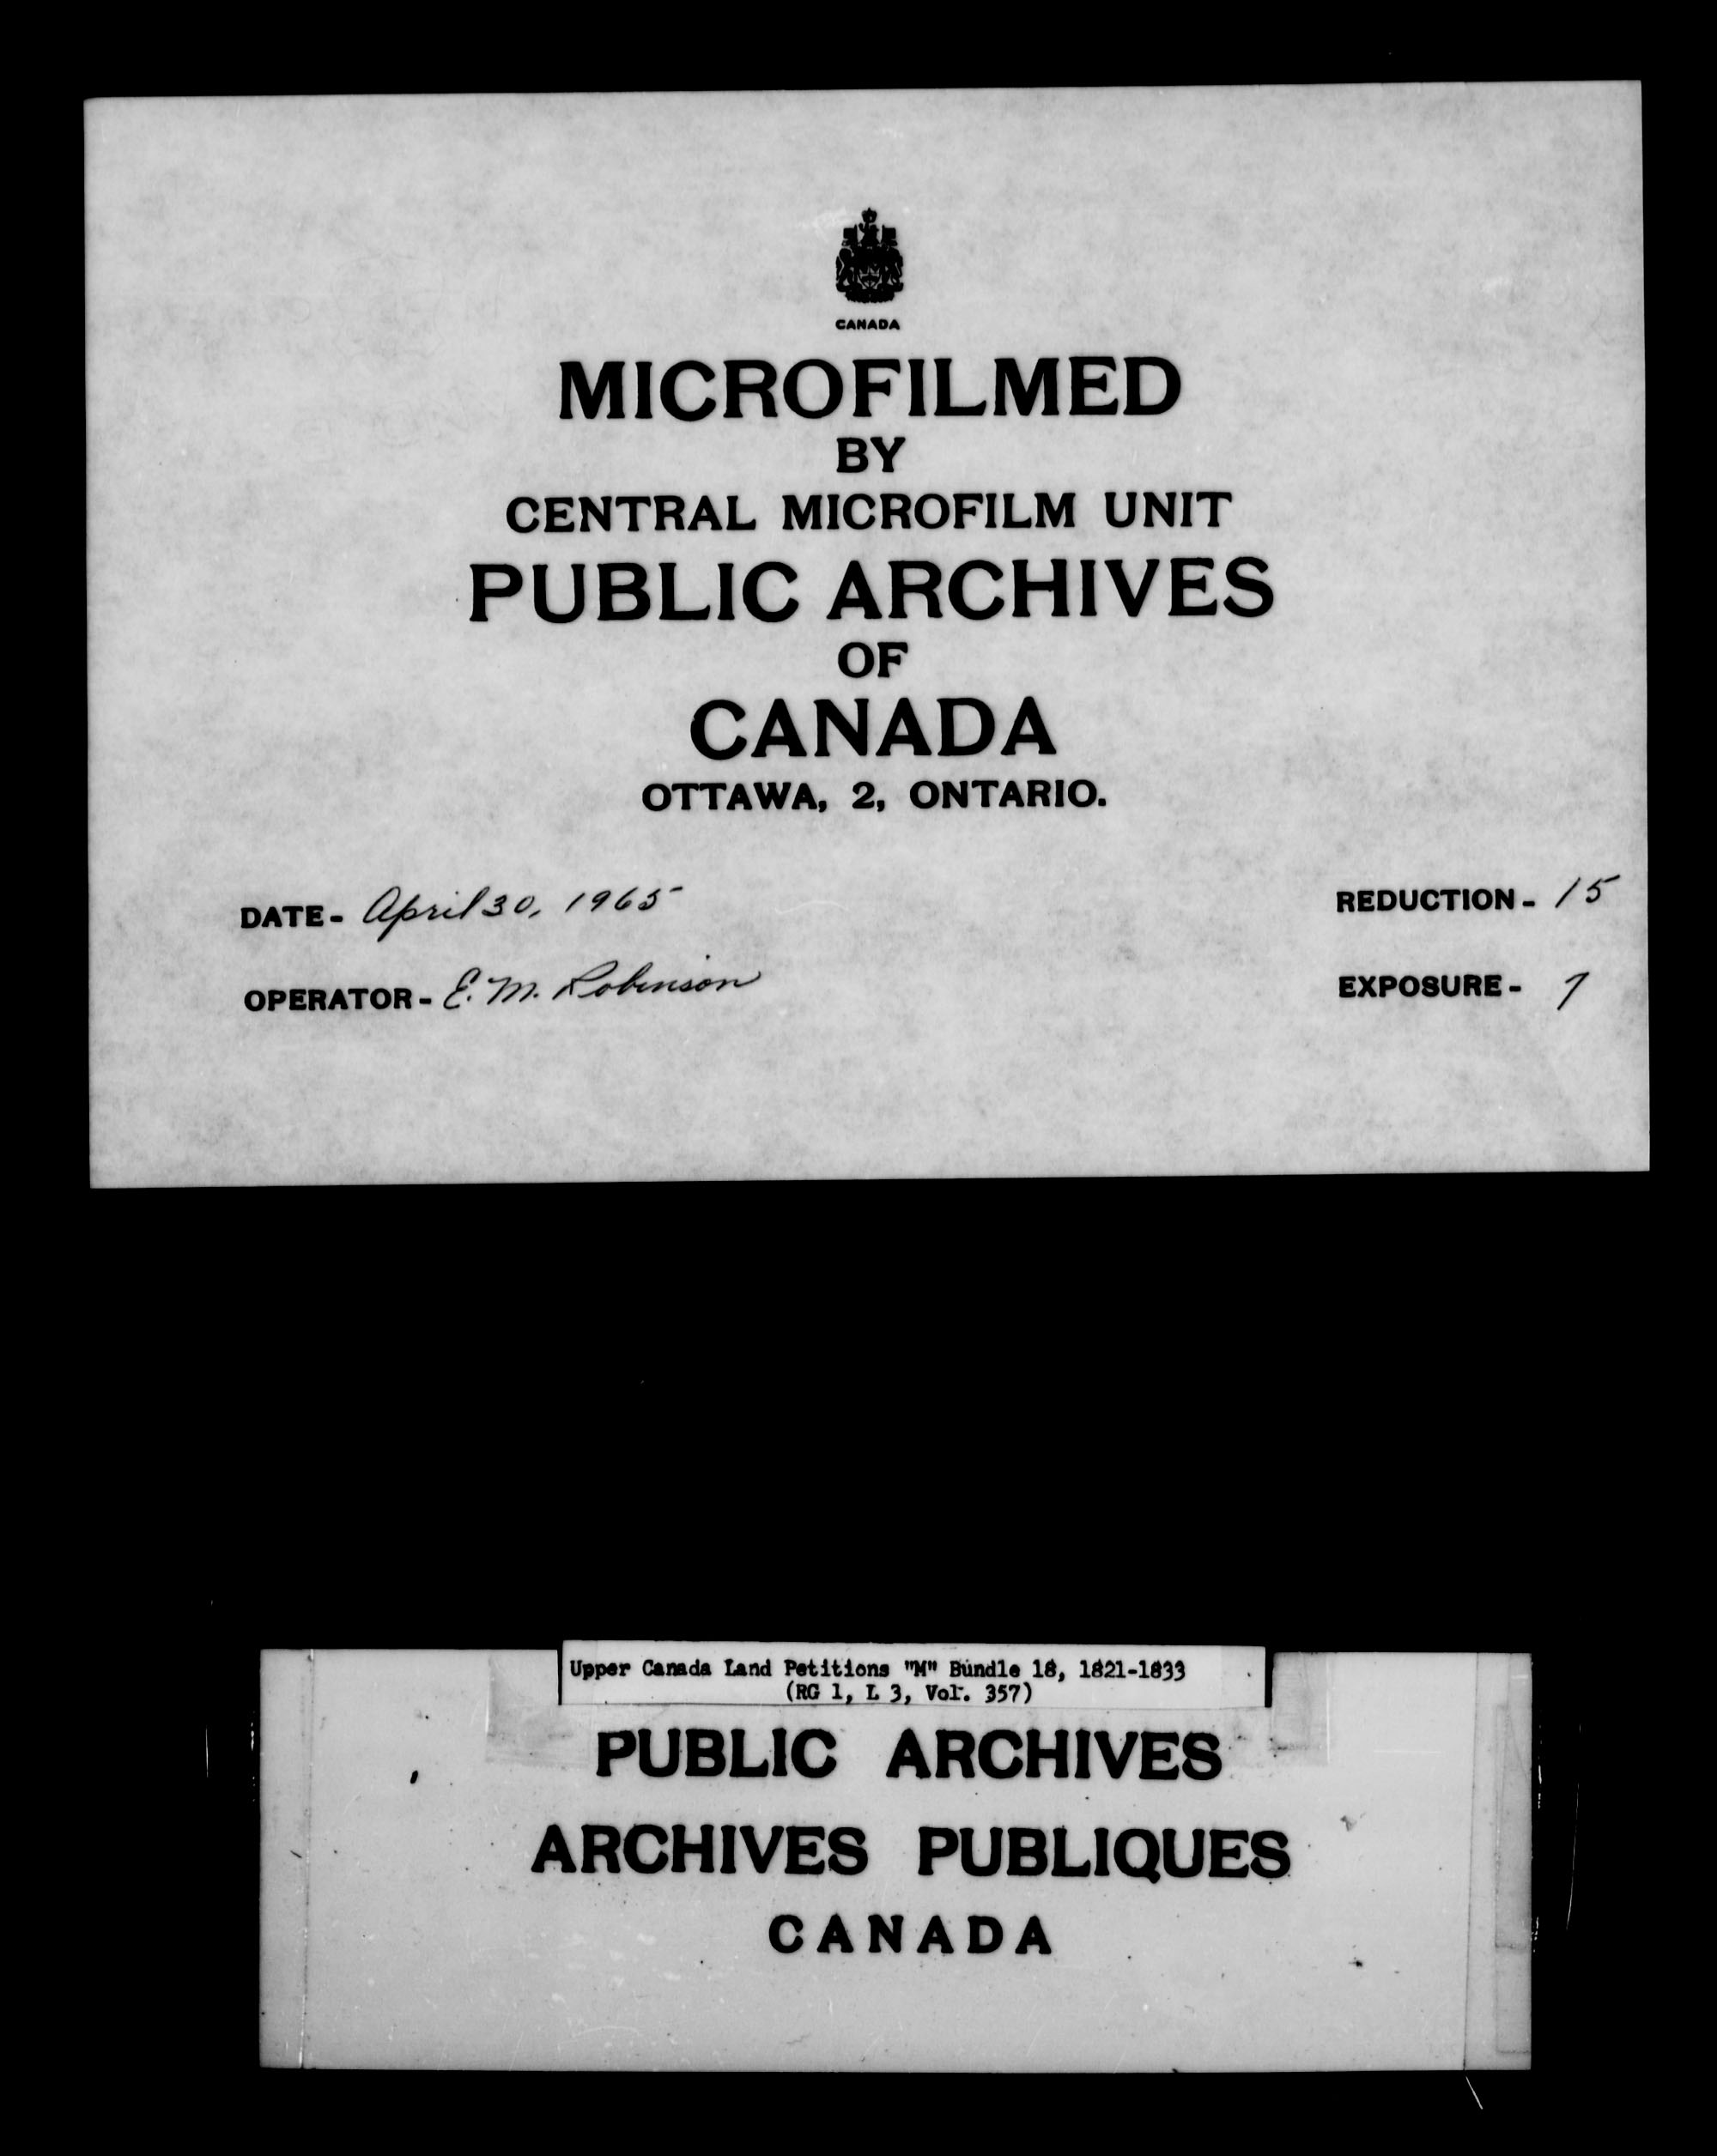 Title: Upper Canada Land Petitions (1763-1865) - Mikan Number: 205131 - Microform: c-2213